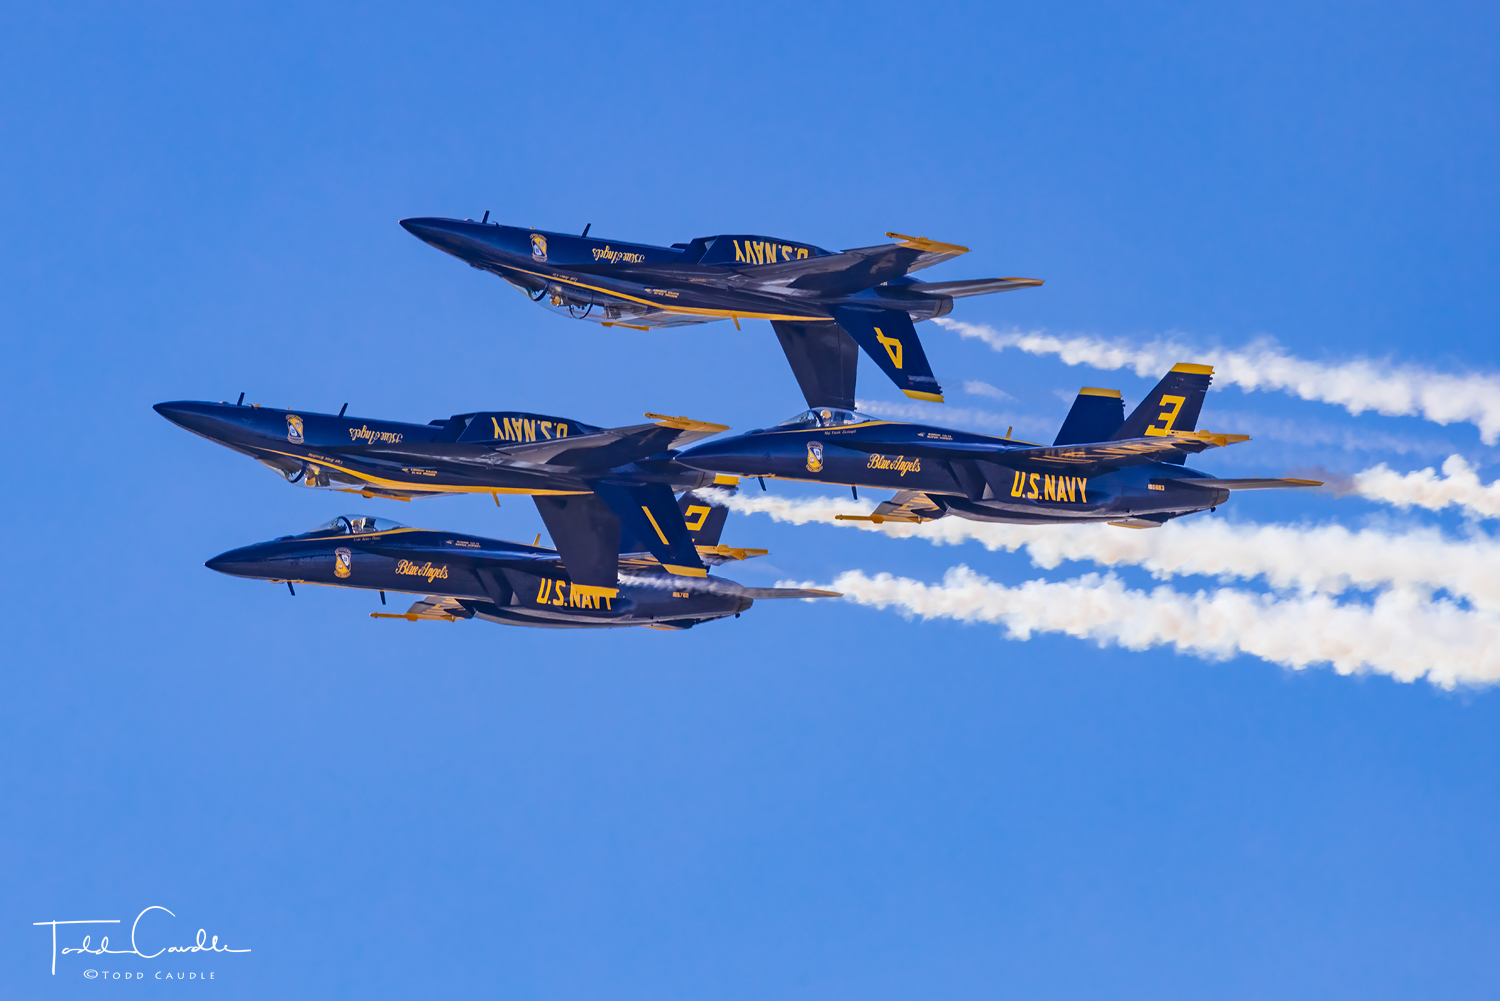 The Navy Blue Angels perform at the 2021 Great Colorado Air Show in their F/A-18E Super Hornets.